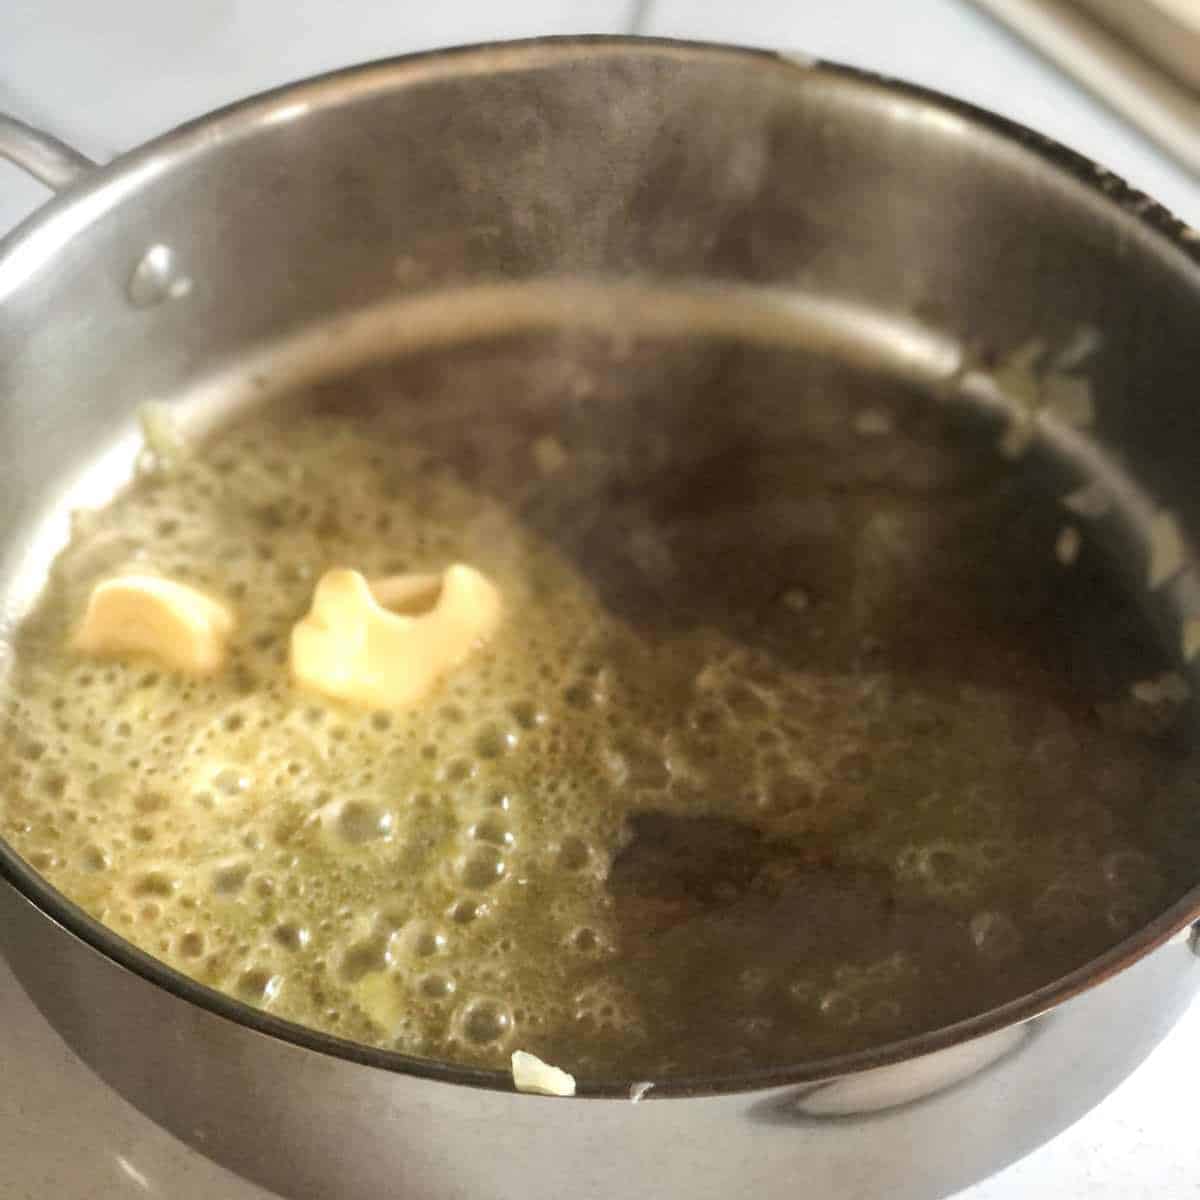 Dairy free butter being melted in a skillet